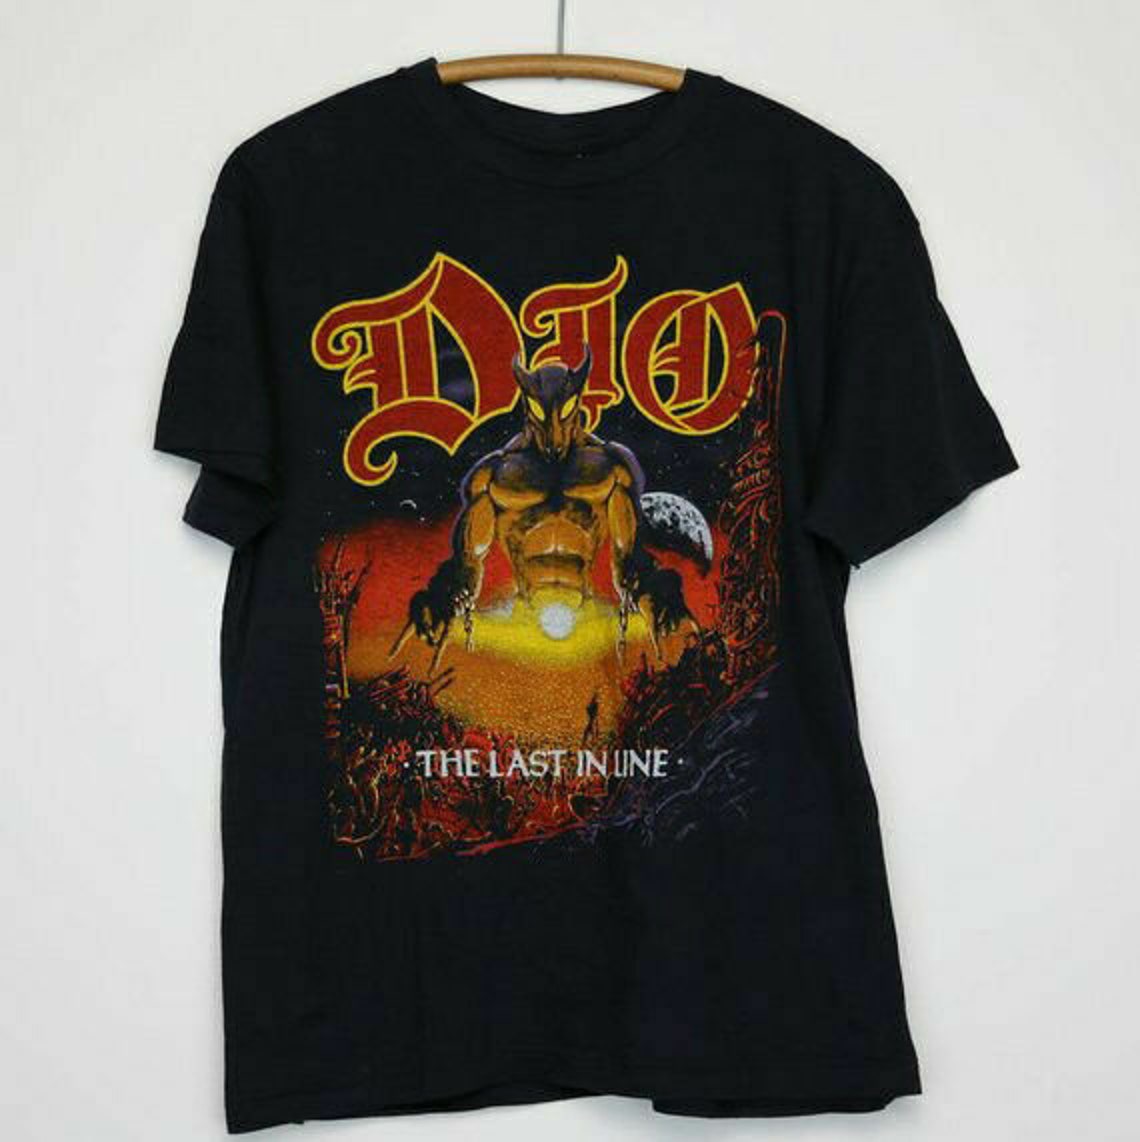 Dio Shirt Vintage tshirt 1984 Last in Line Tour Concert Tee | Etsy